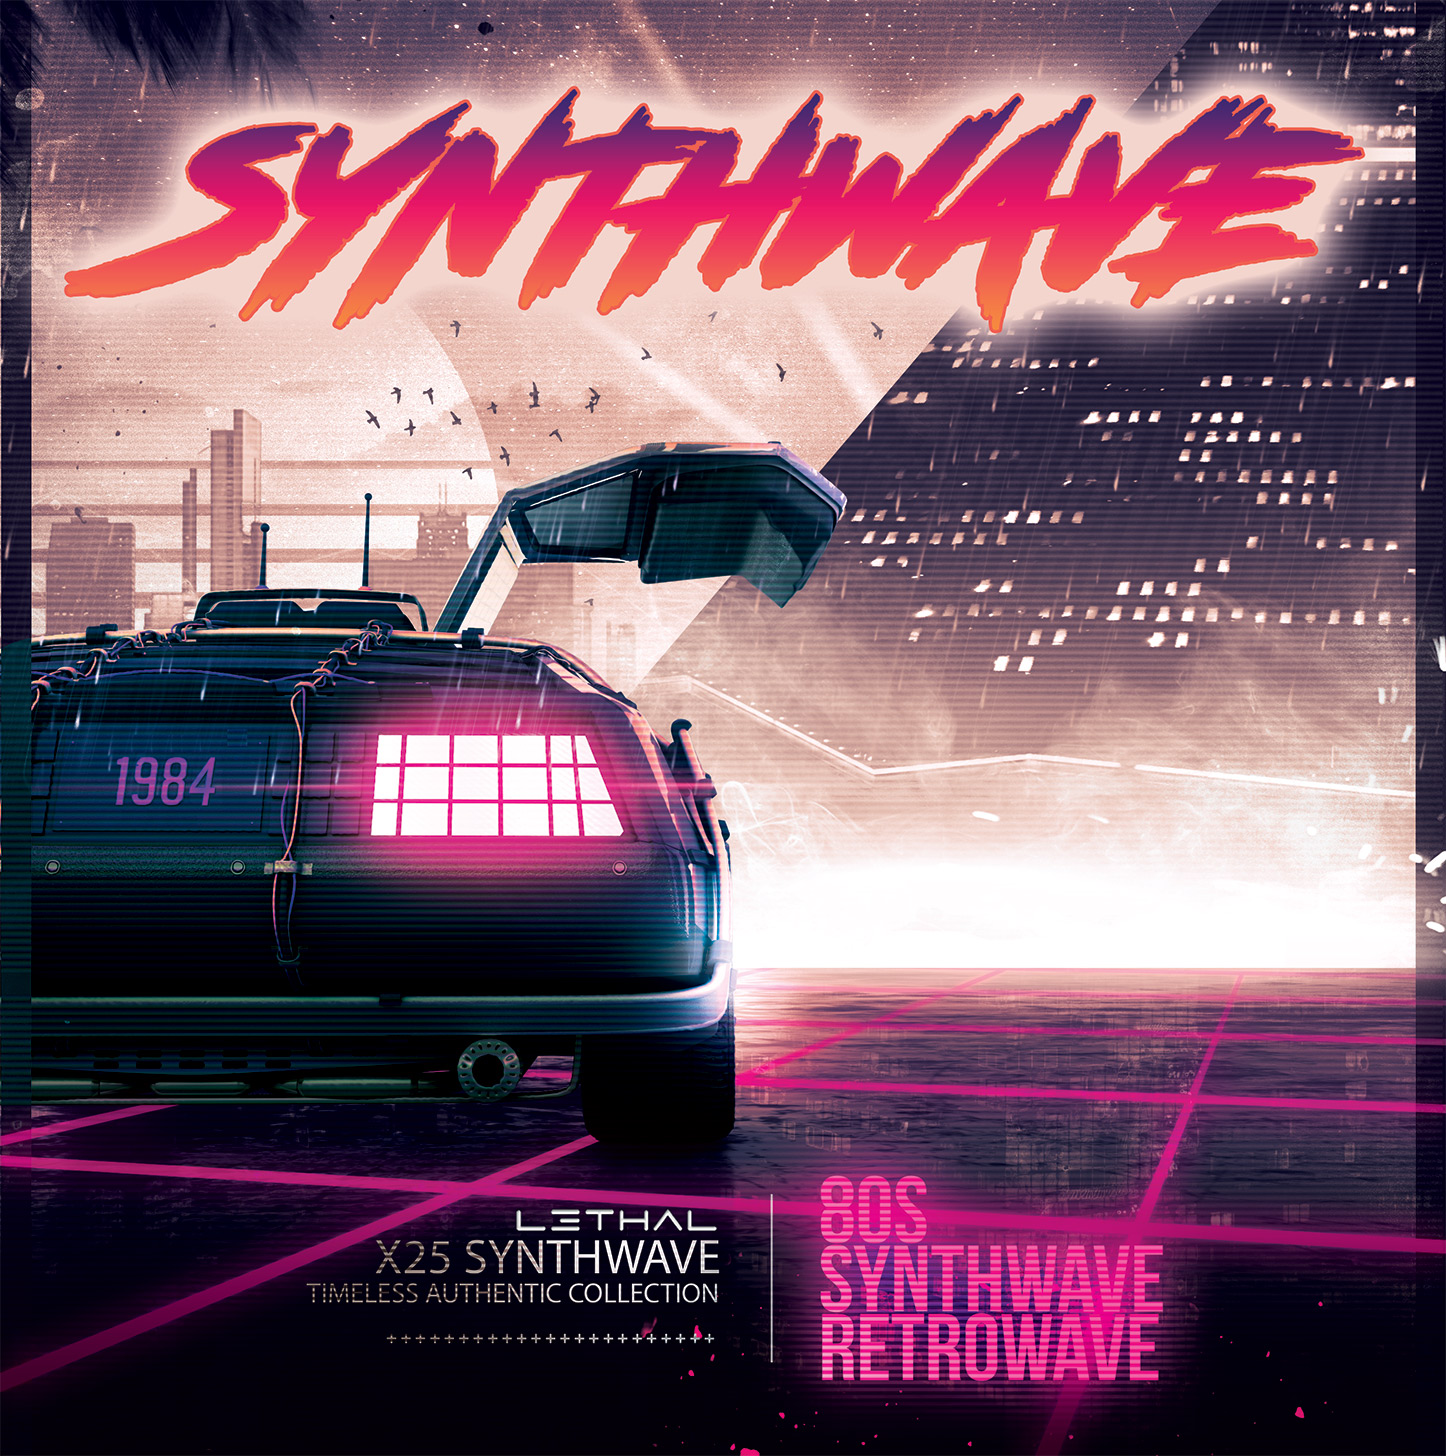 Introducing X25 SYNTHWAVE